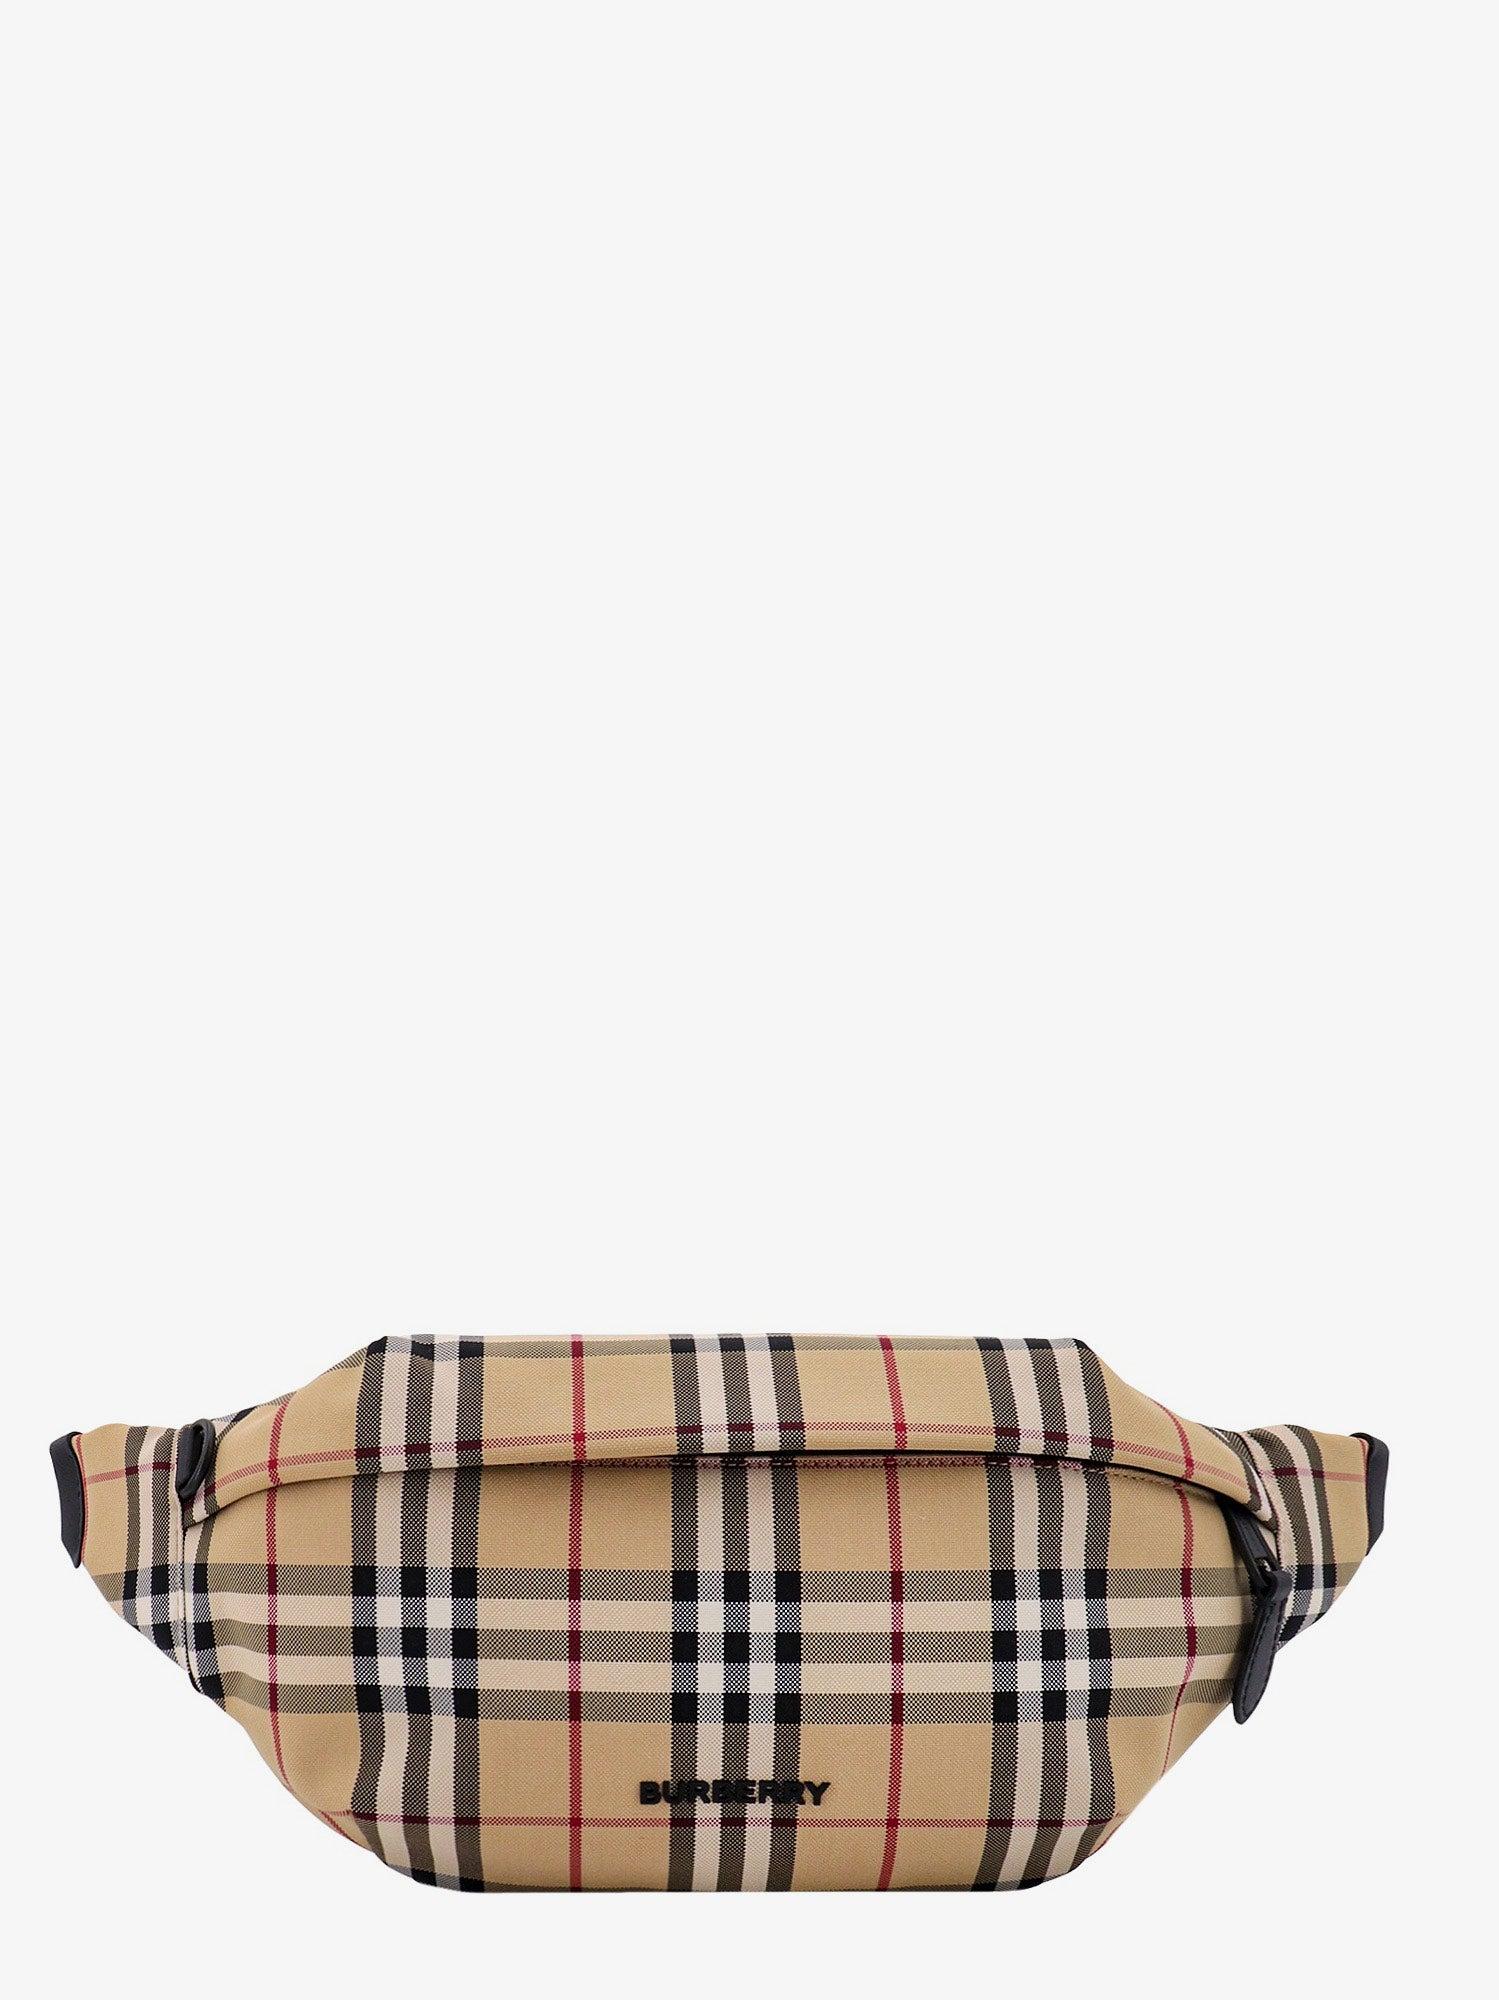 Burberry Check Zip Pouch